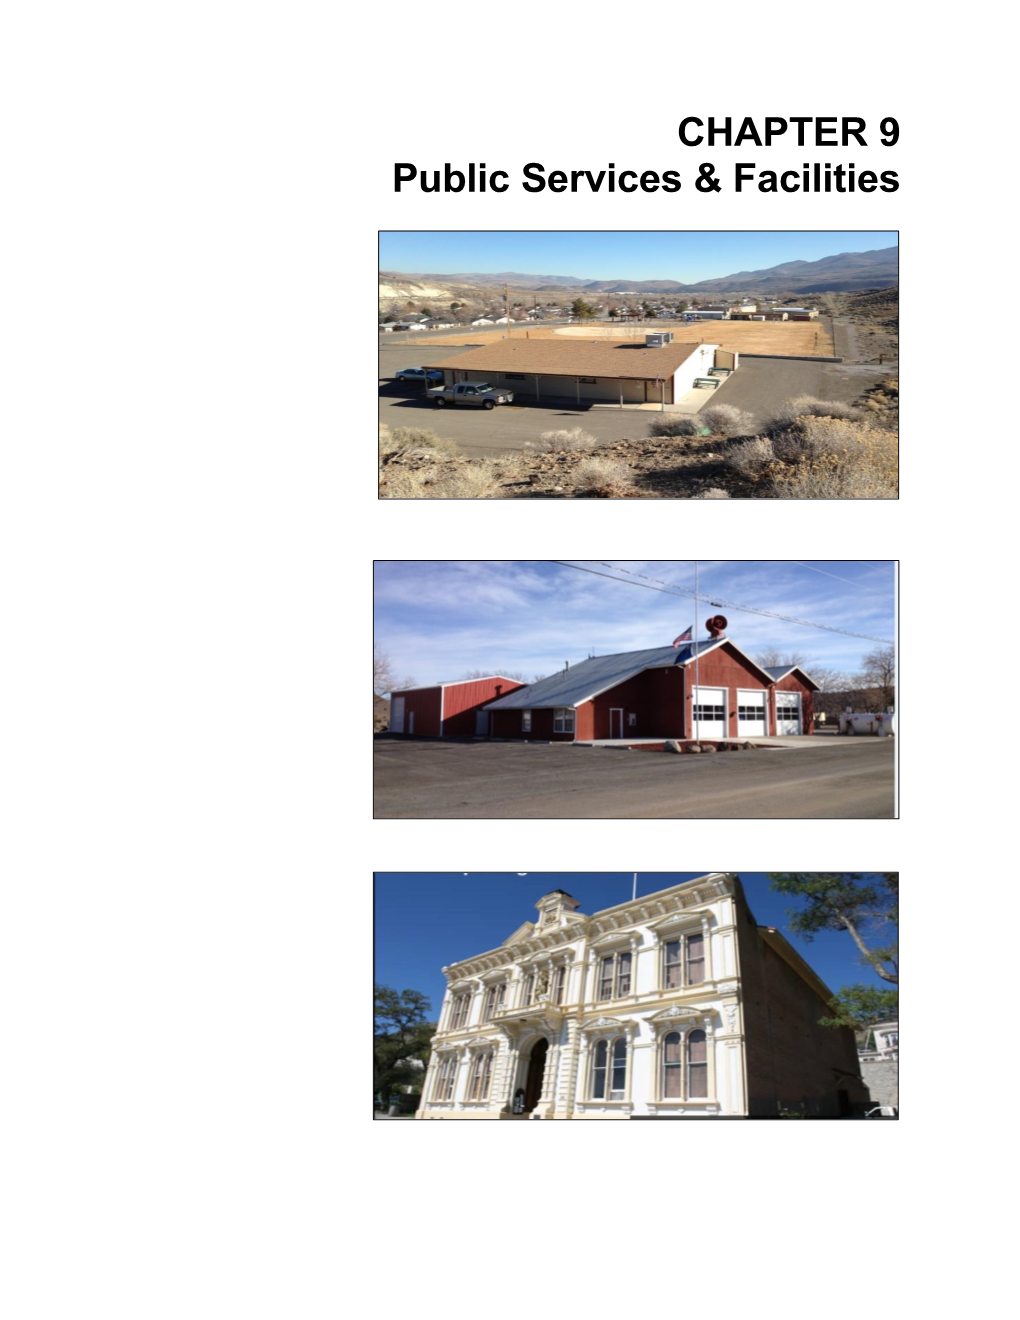 CHAPTER 9 Public Services & Facilities